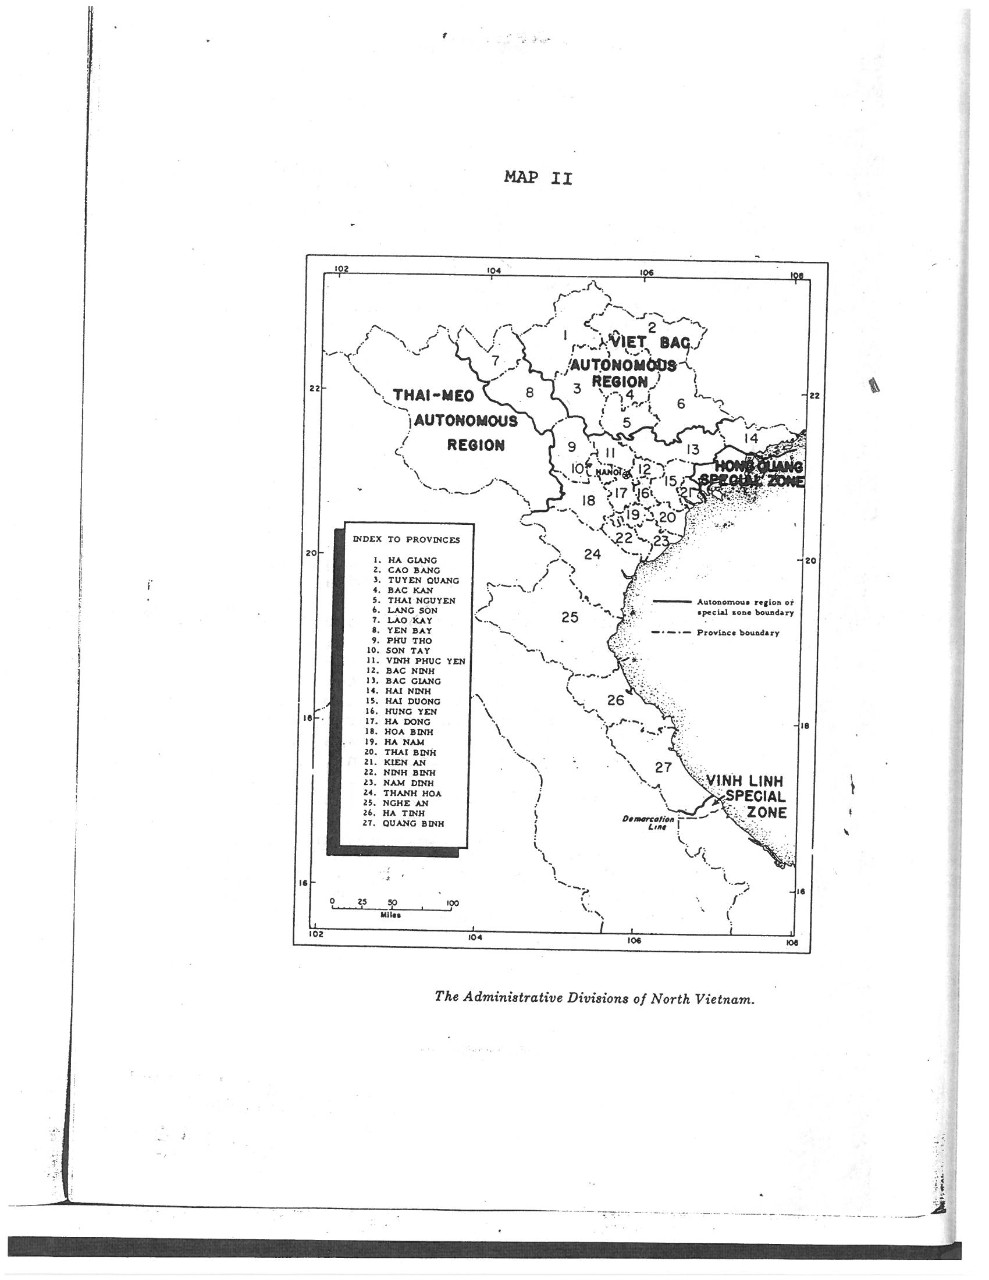 The Administrative Divisions of North Vietnam